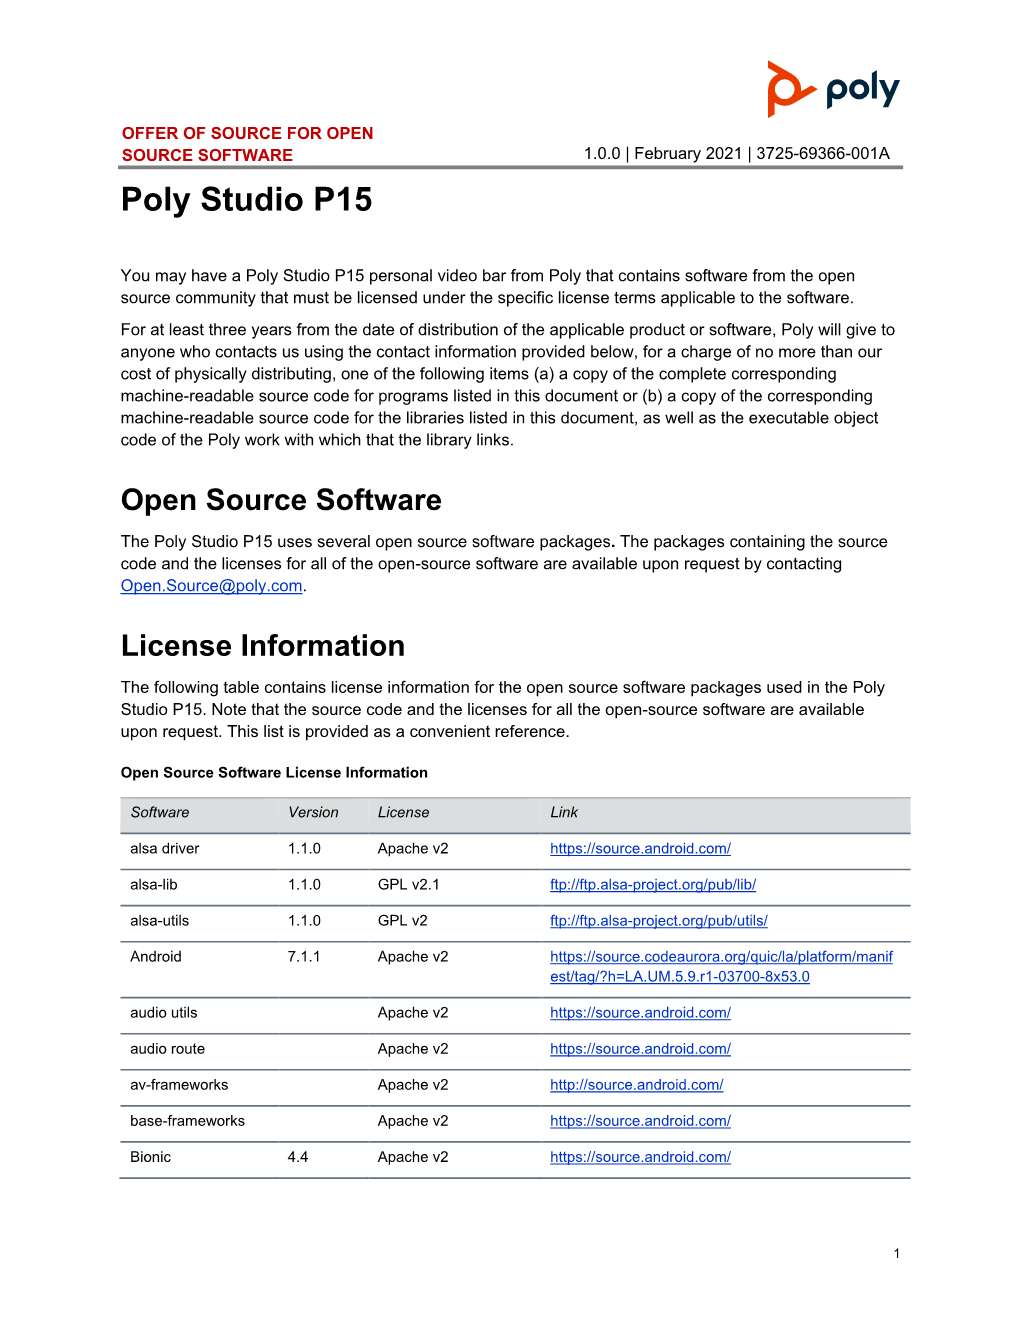 Poly Studio P15 Offer of Source for Open Source Software